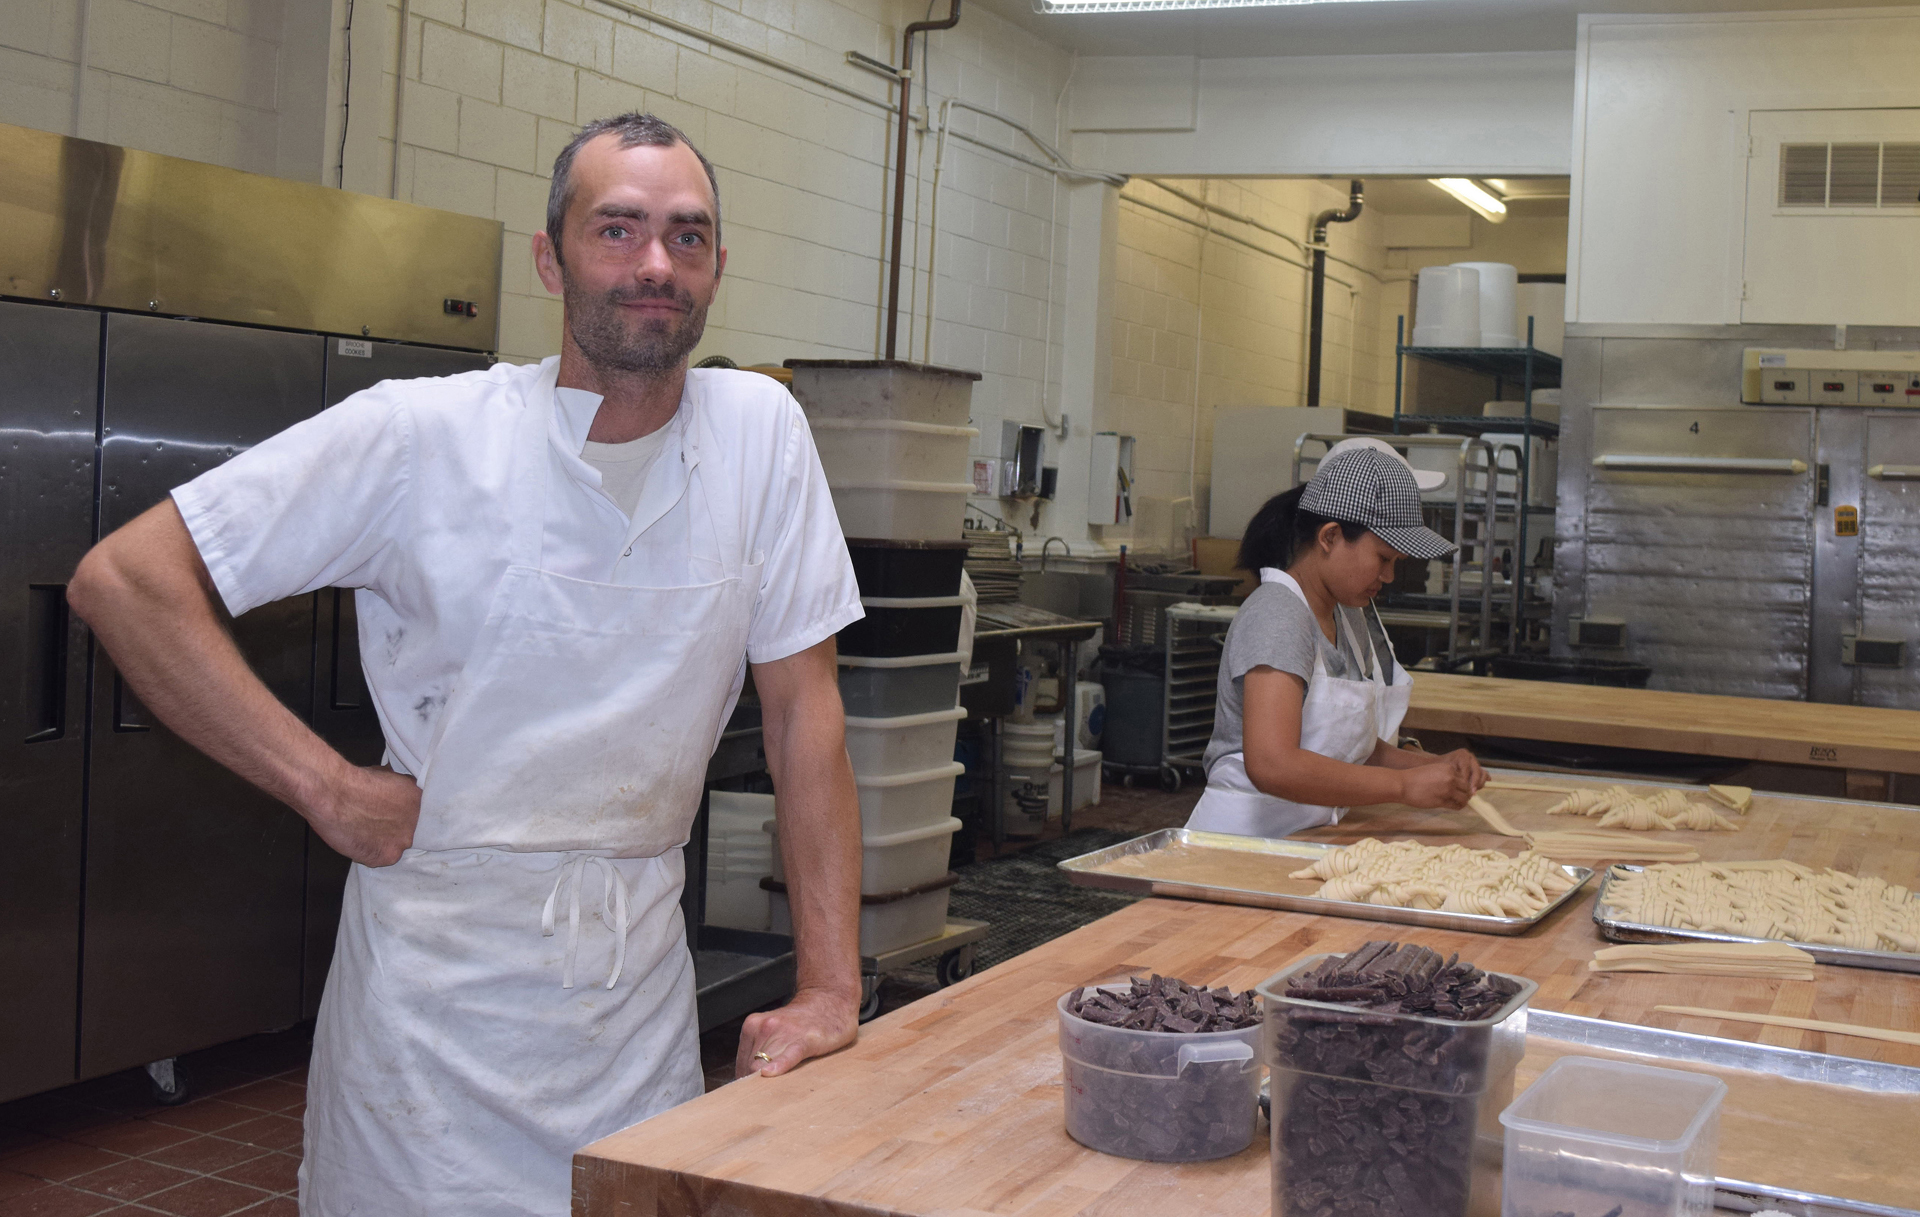 "Mac" McConnell near the pastry production area in his Mountain View bakery, which is located in Acme's former South Bay digs.